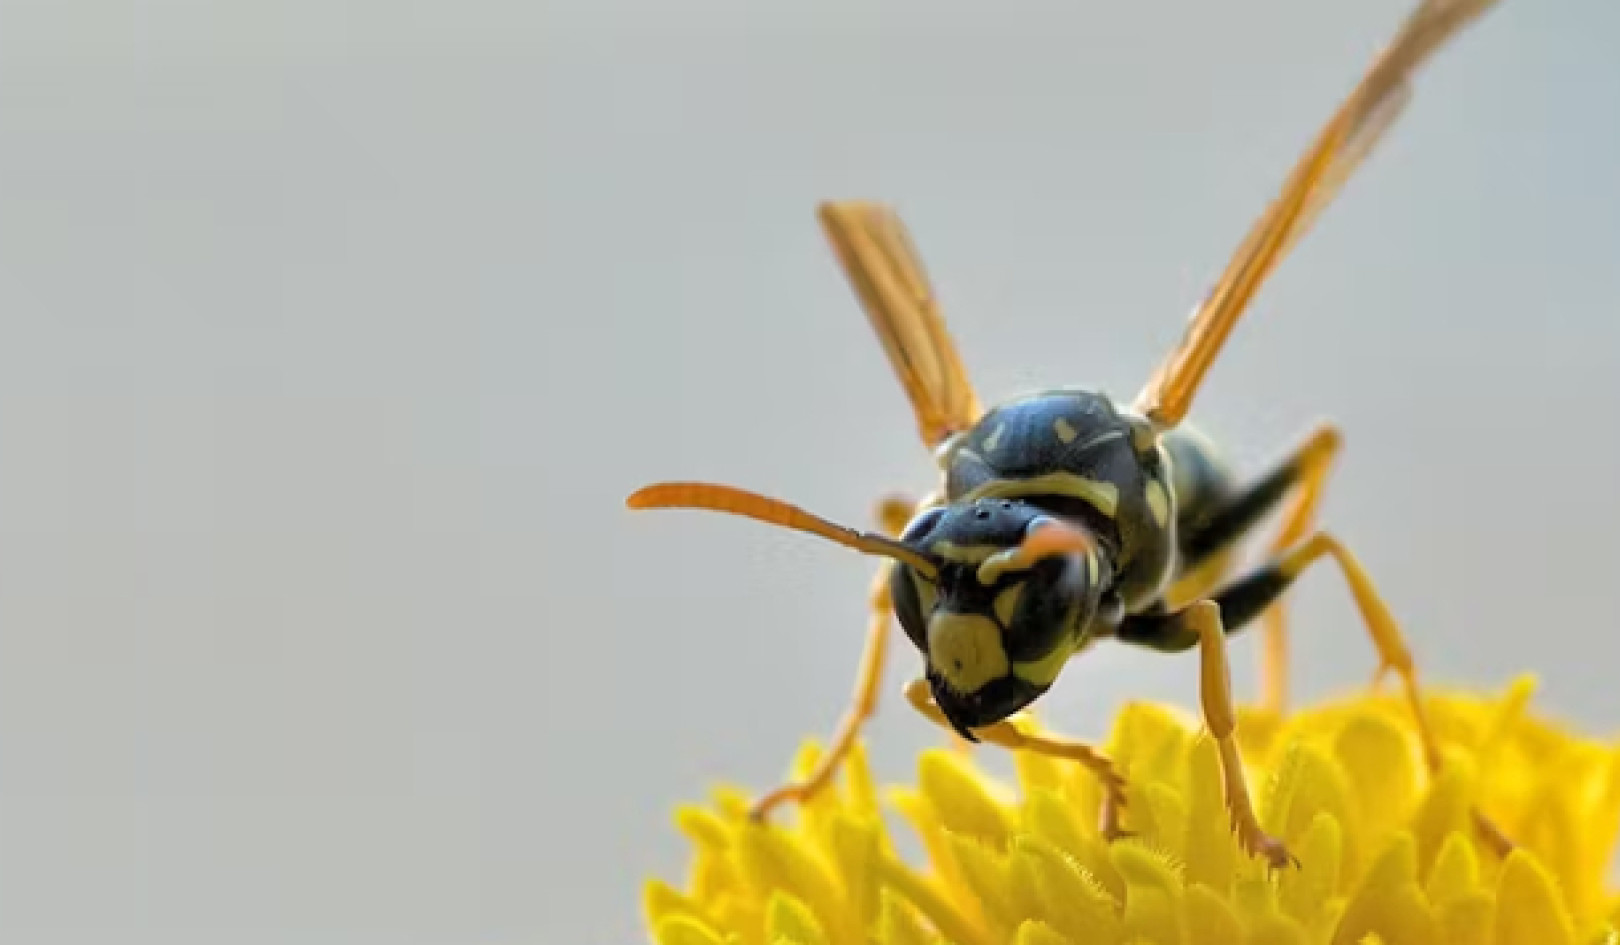 Wasps: The Underestimated Genius in Your Backyard